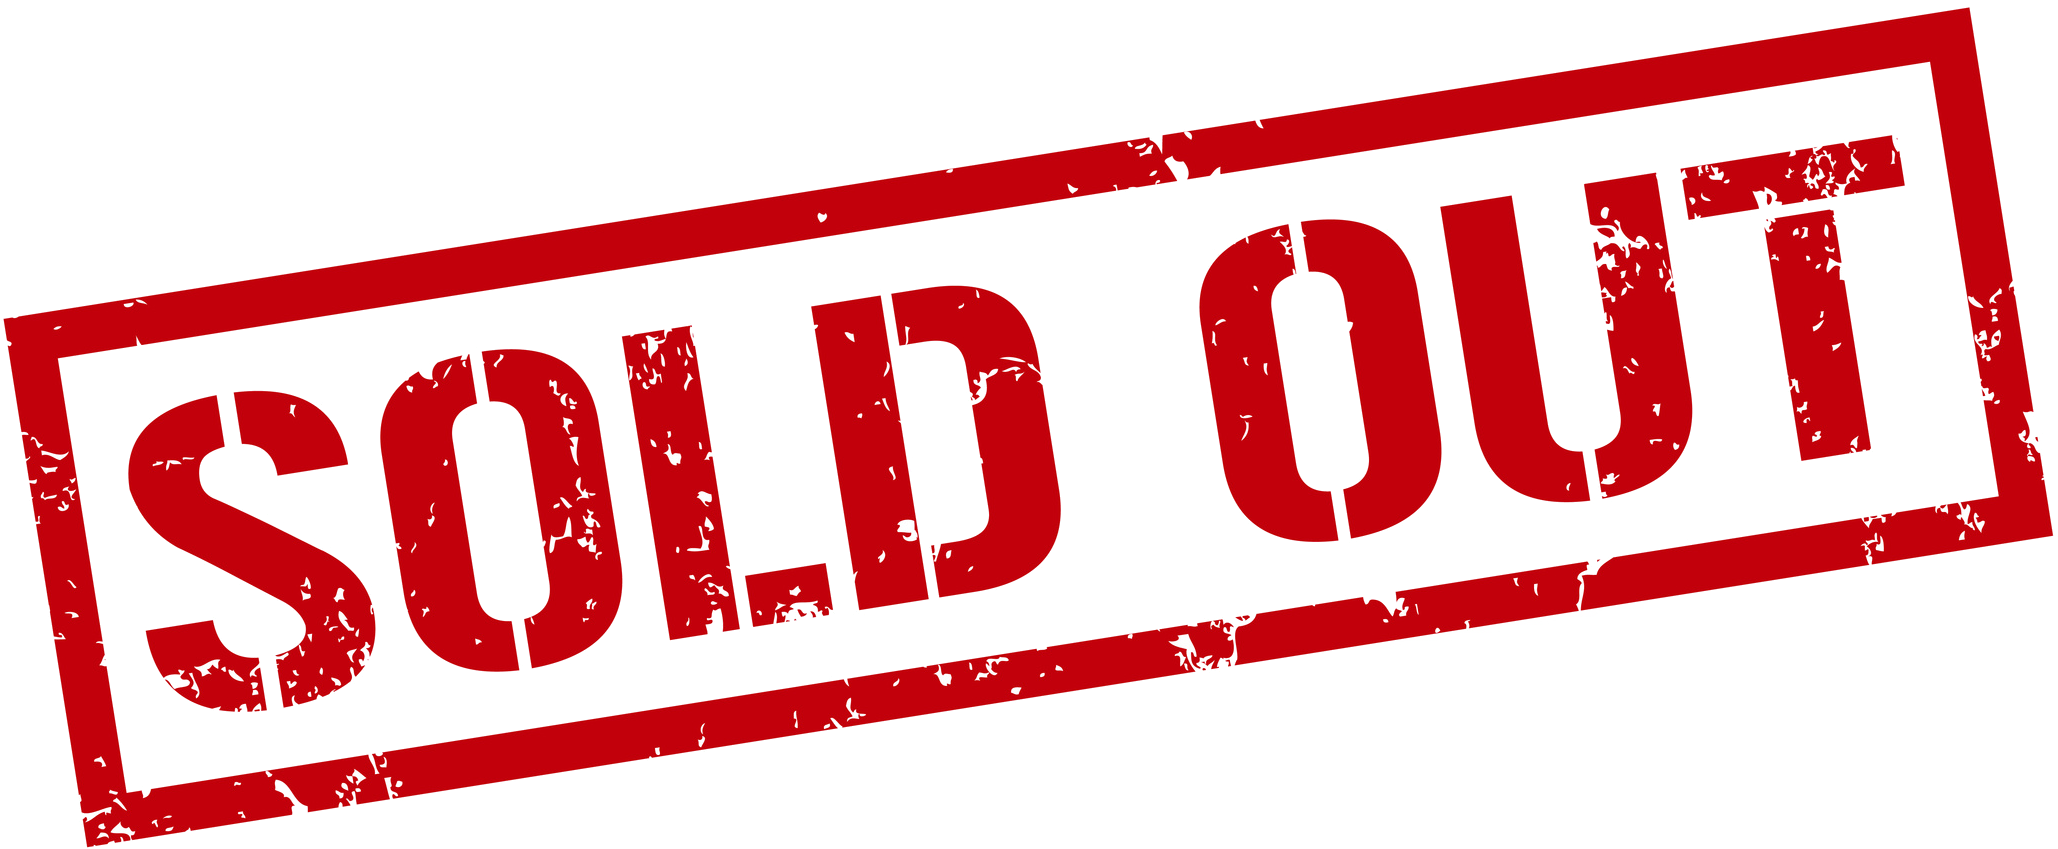 sold out sign transparent
